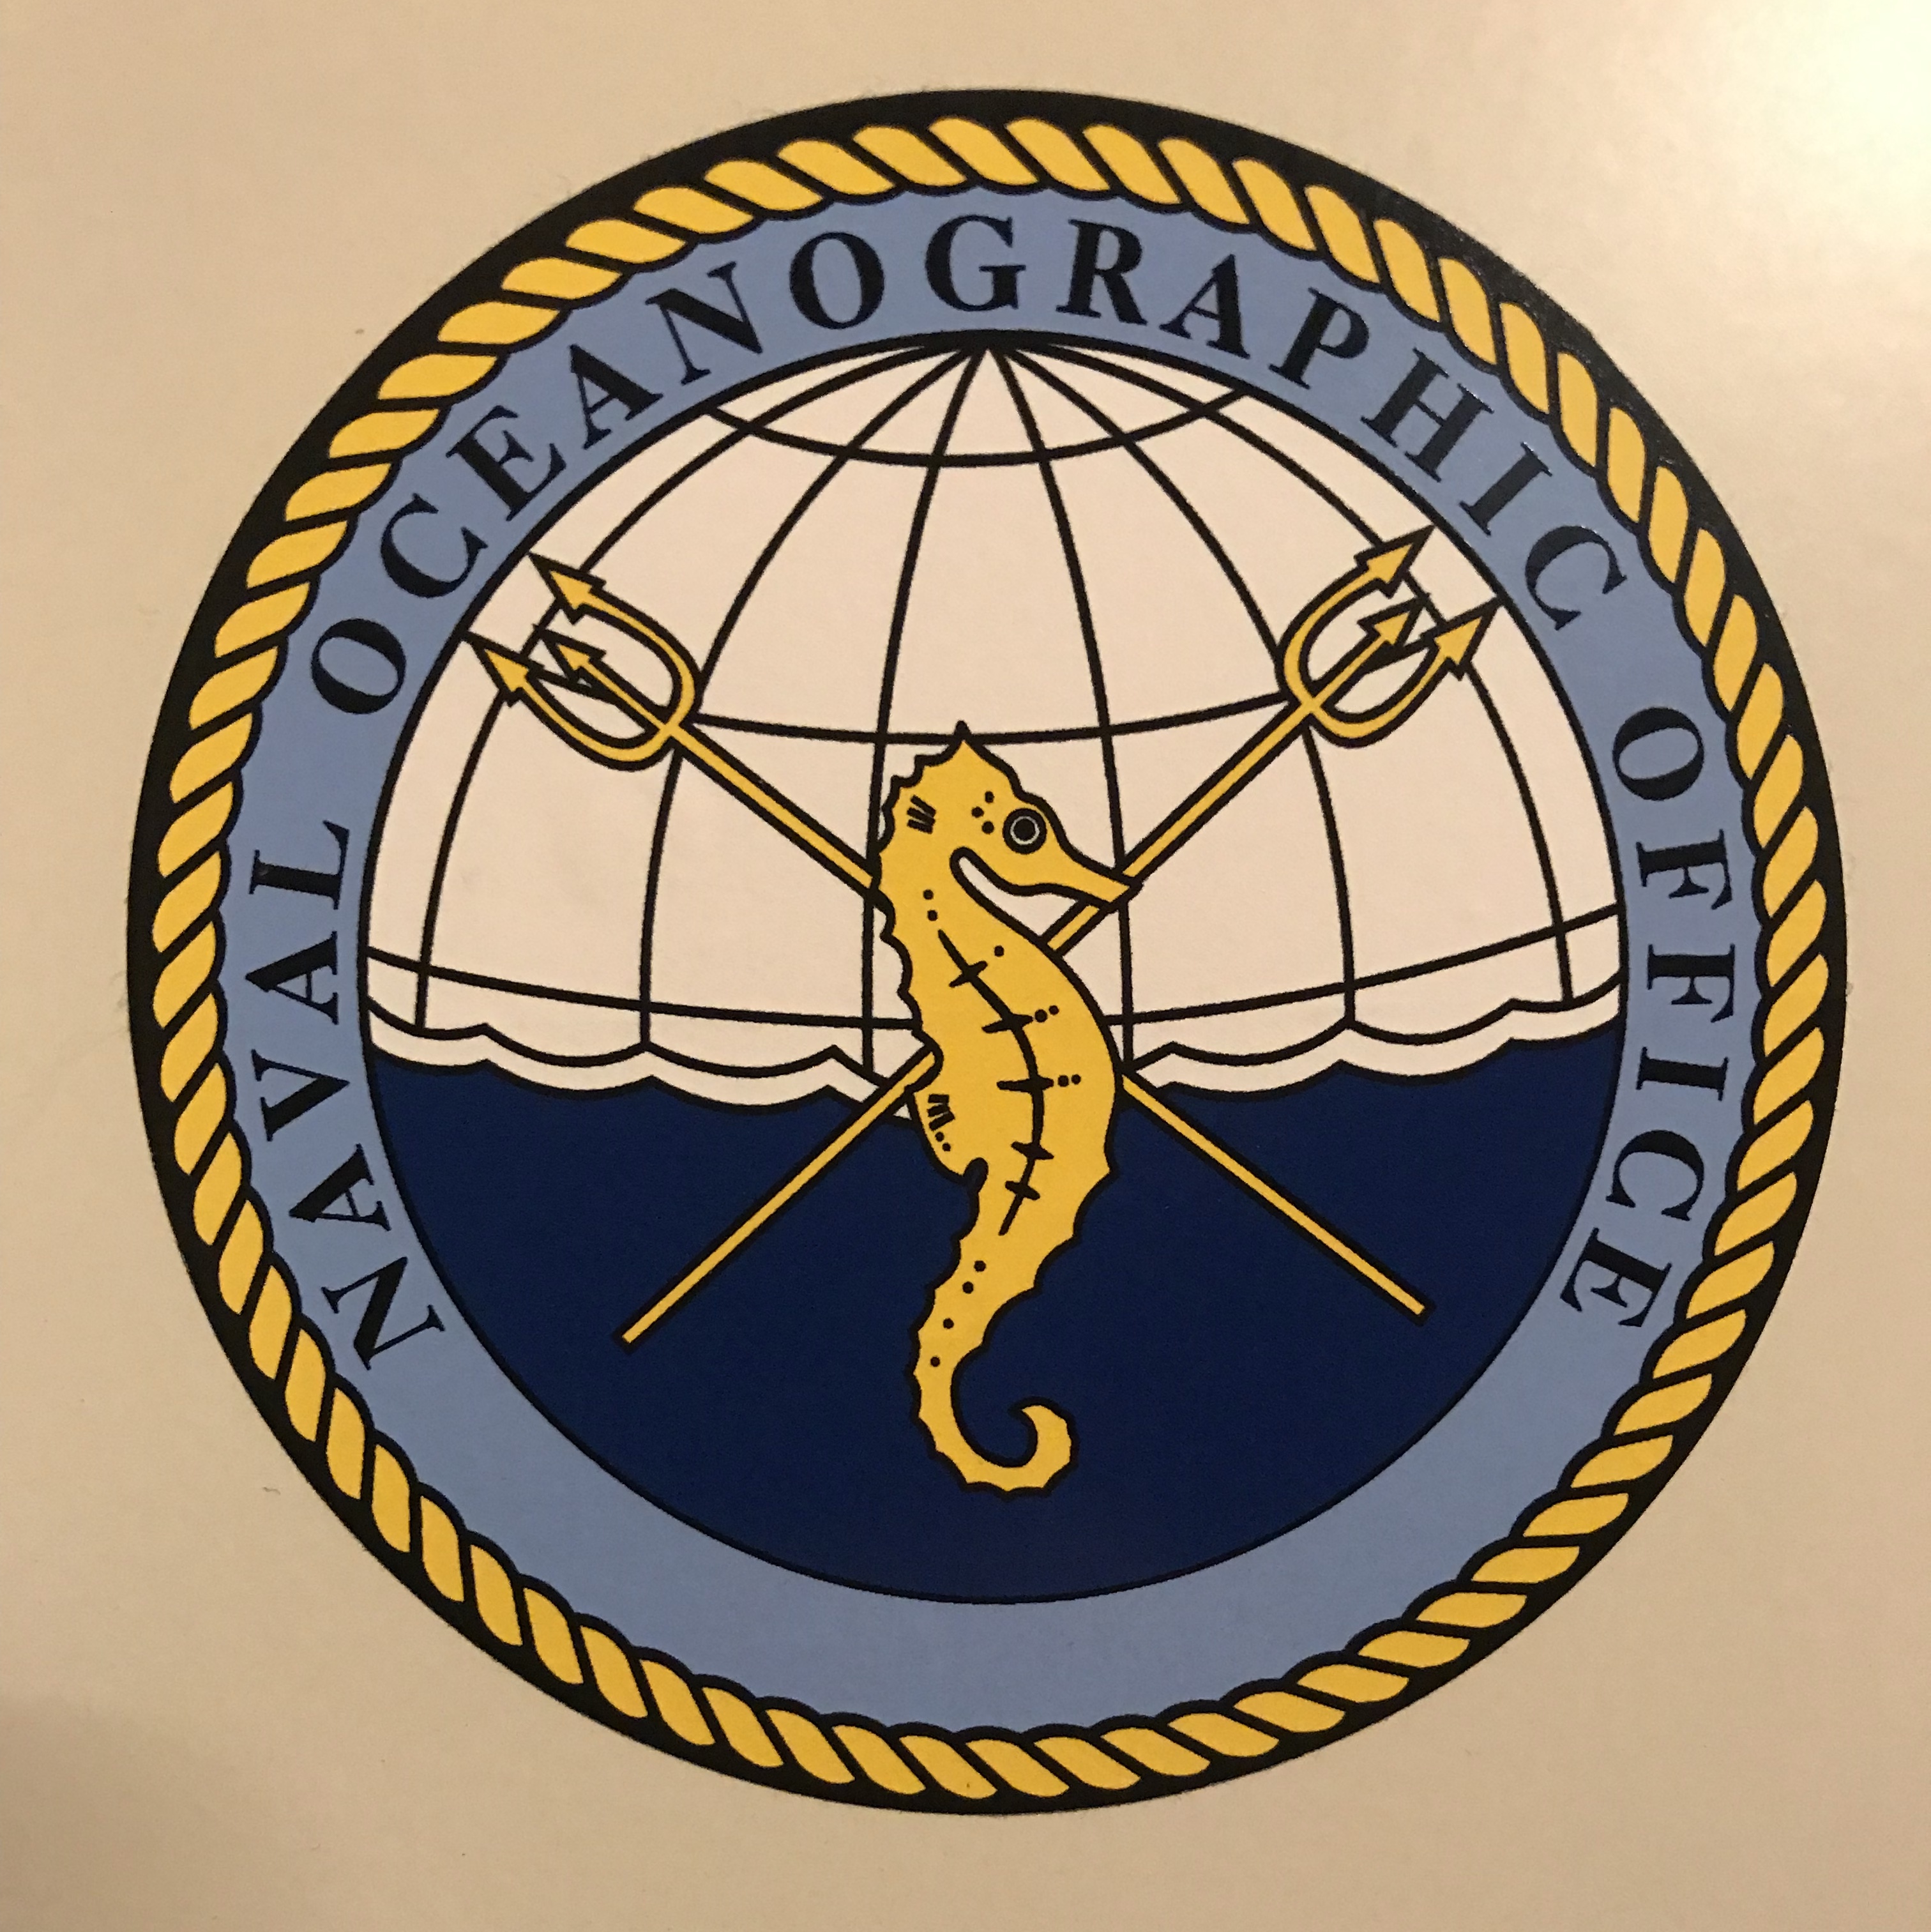 Circular logo with yellow seahorse and two yellow tridents